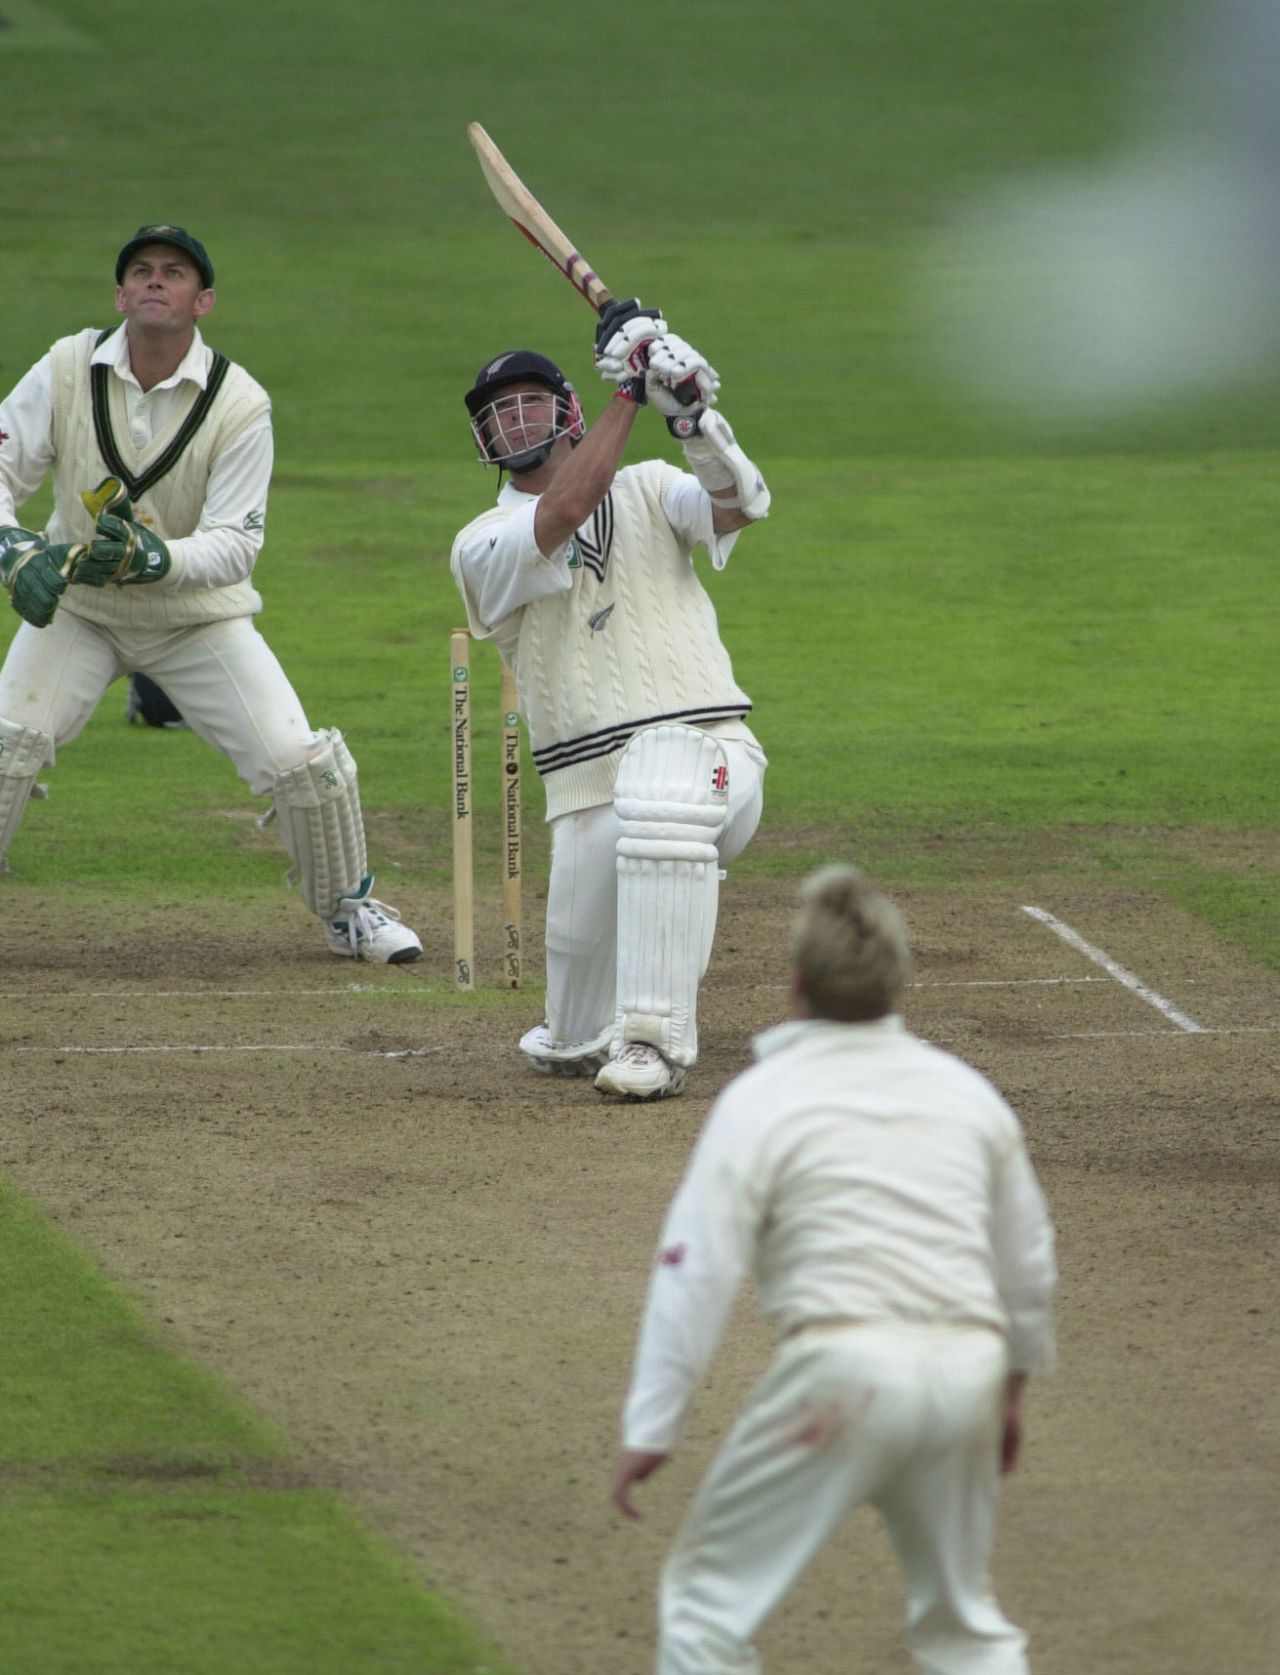 Chris Cairns hits a six as Shane Warne and Adam Gilchrist look on, New Zealand v Australia, second Test, day three, Wellington, March 26, 2000


